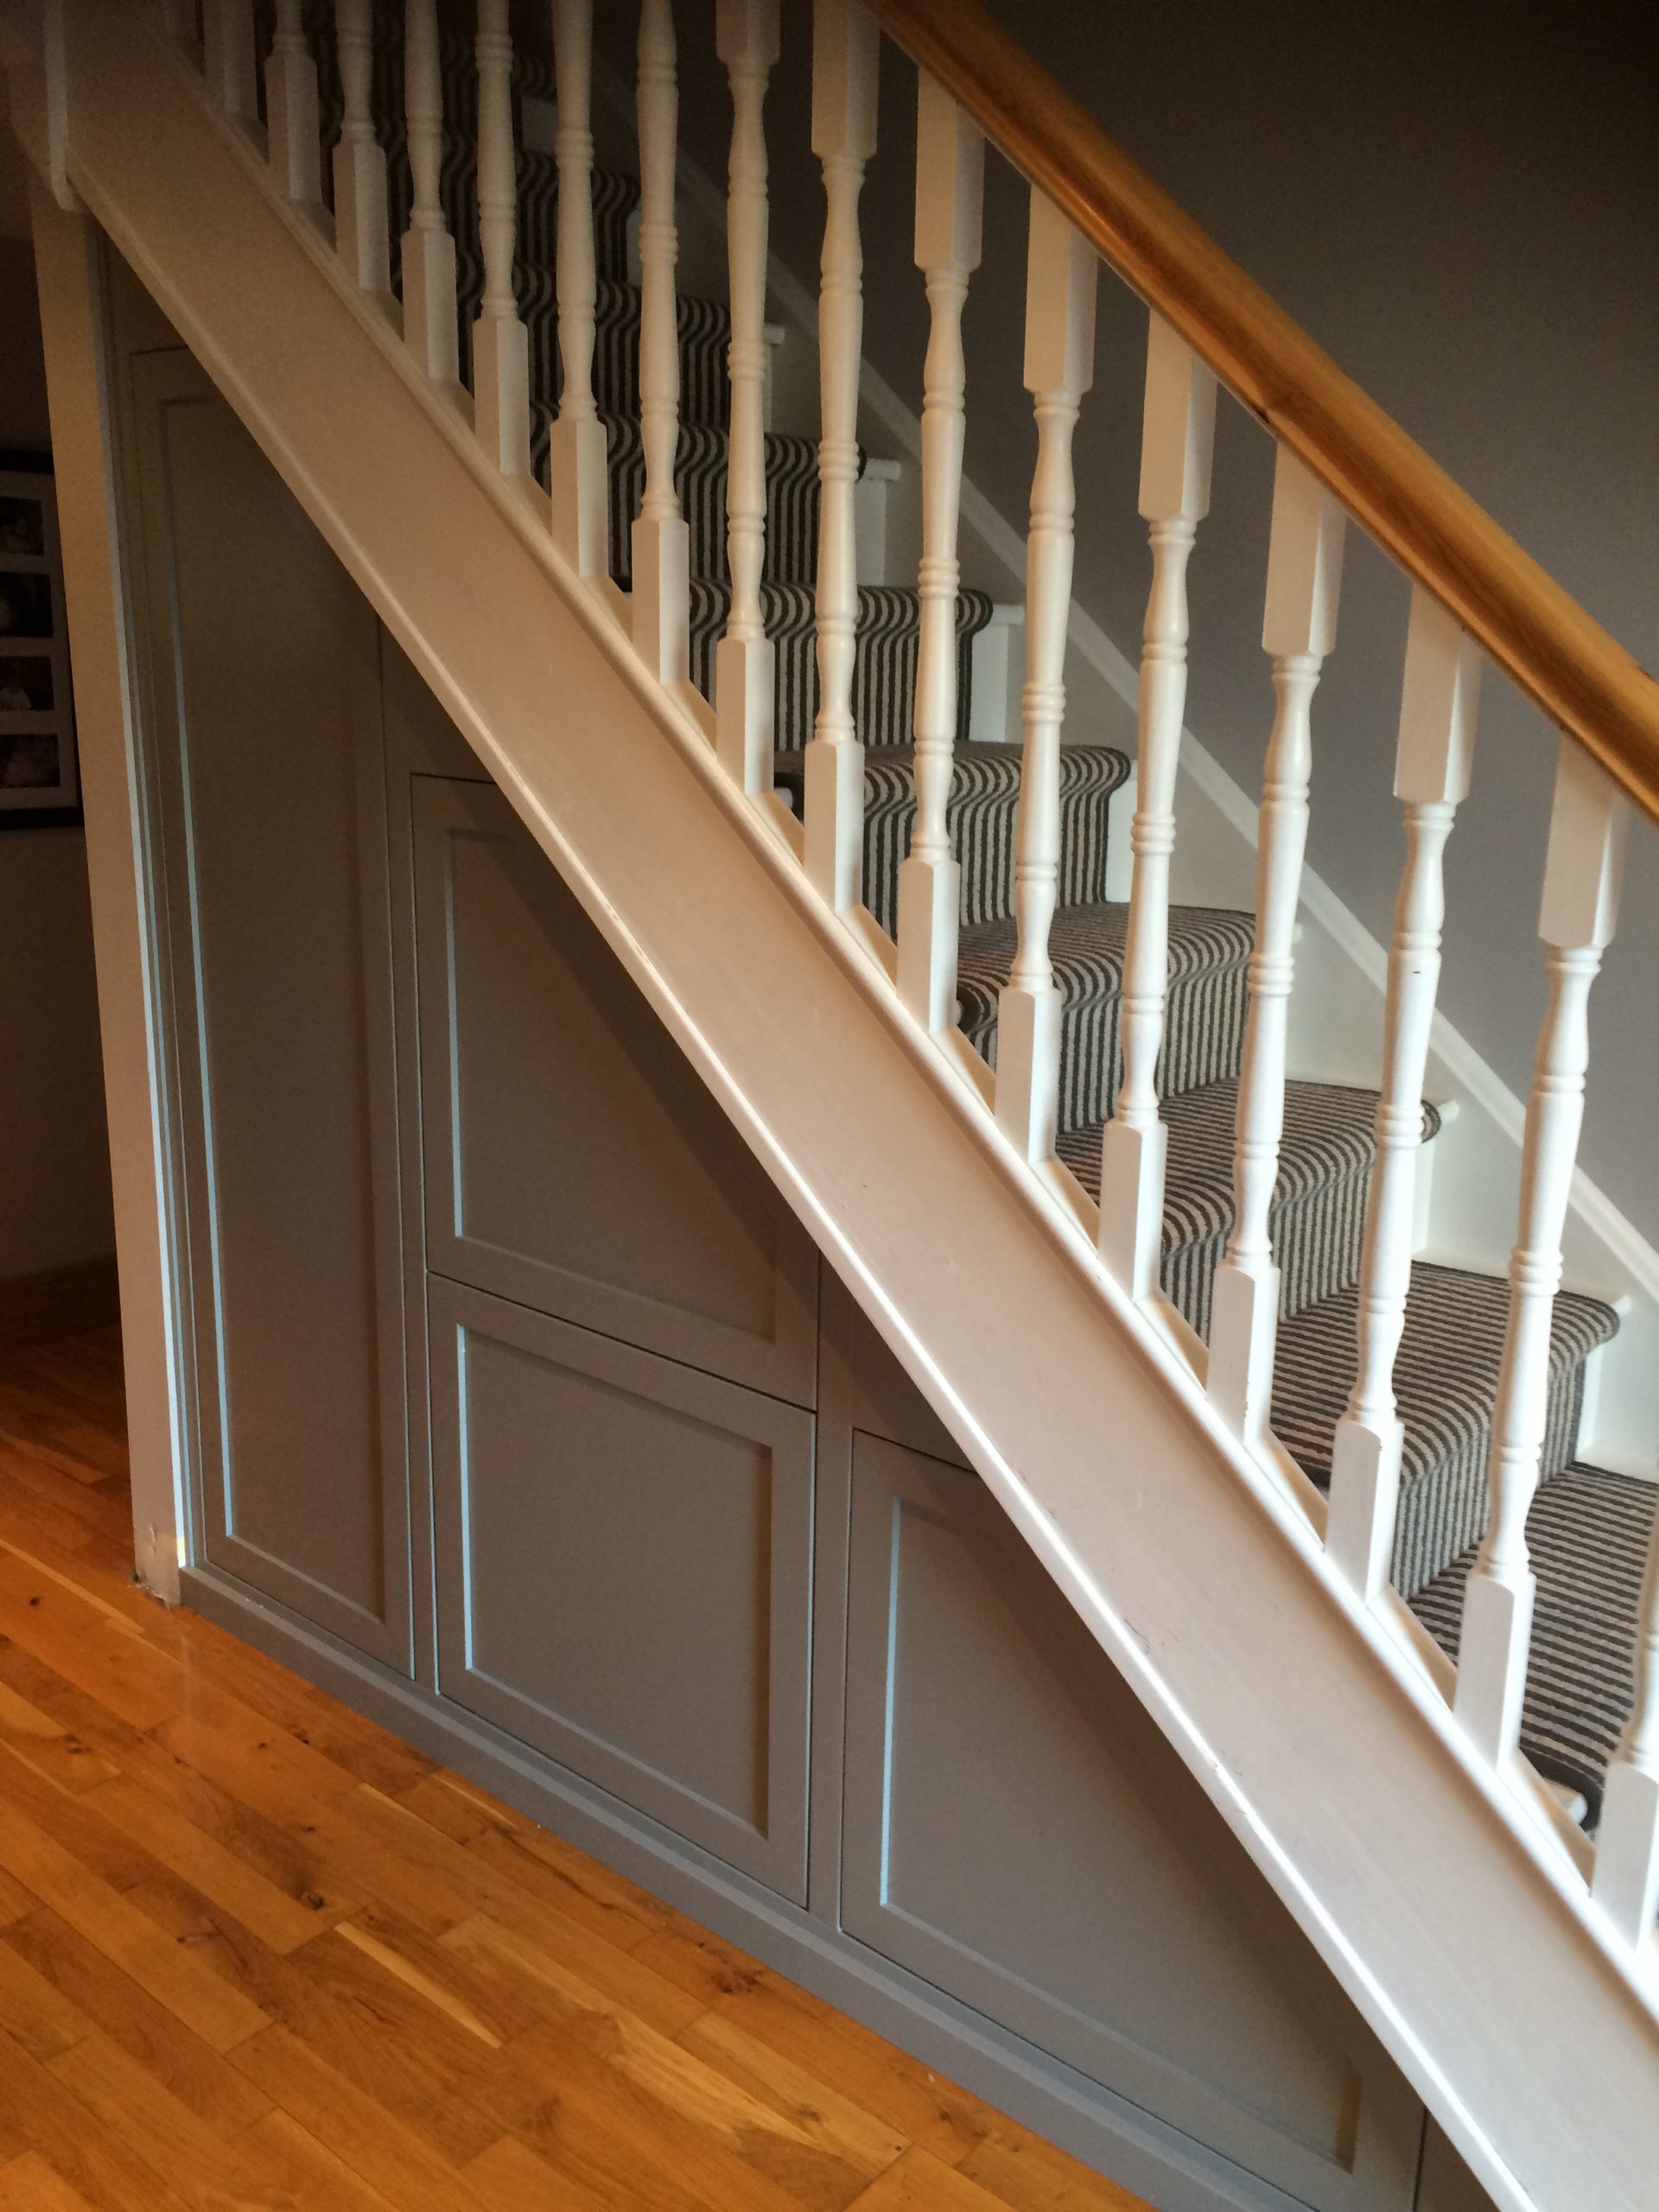 Shaker style fronts sprayed any colour you choose